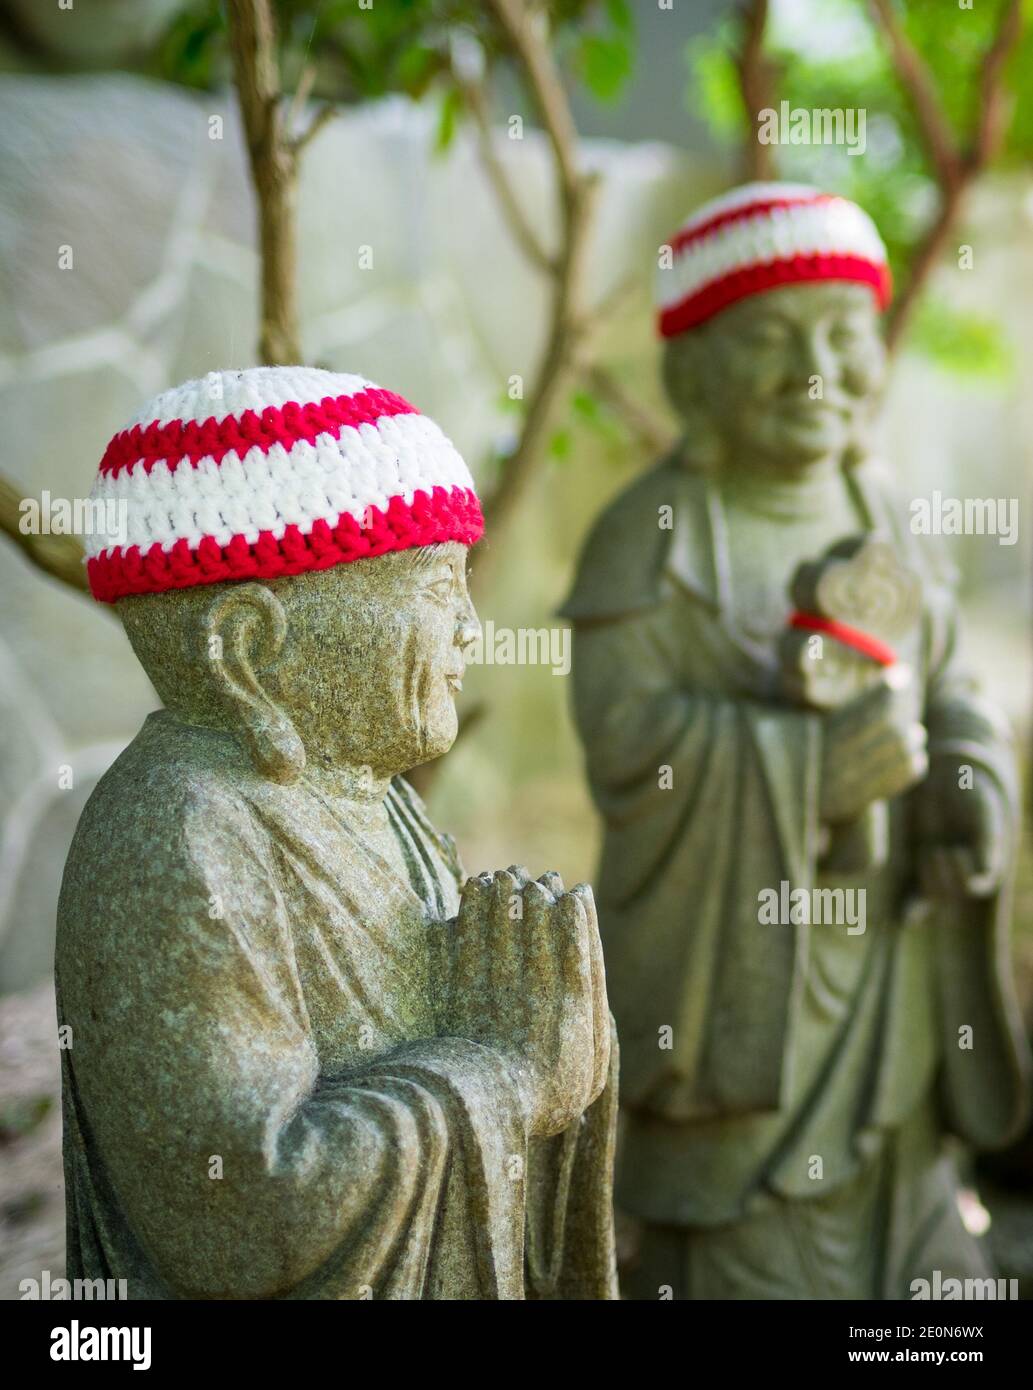 Statues of the original followers of Buddha (called Shaka Nyorai in Japan), with knitted caps at Daisho-in Temple (Daishoin Temple), Miyajima, Japan. Stock Photo